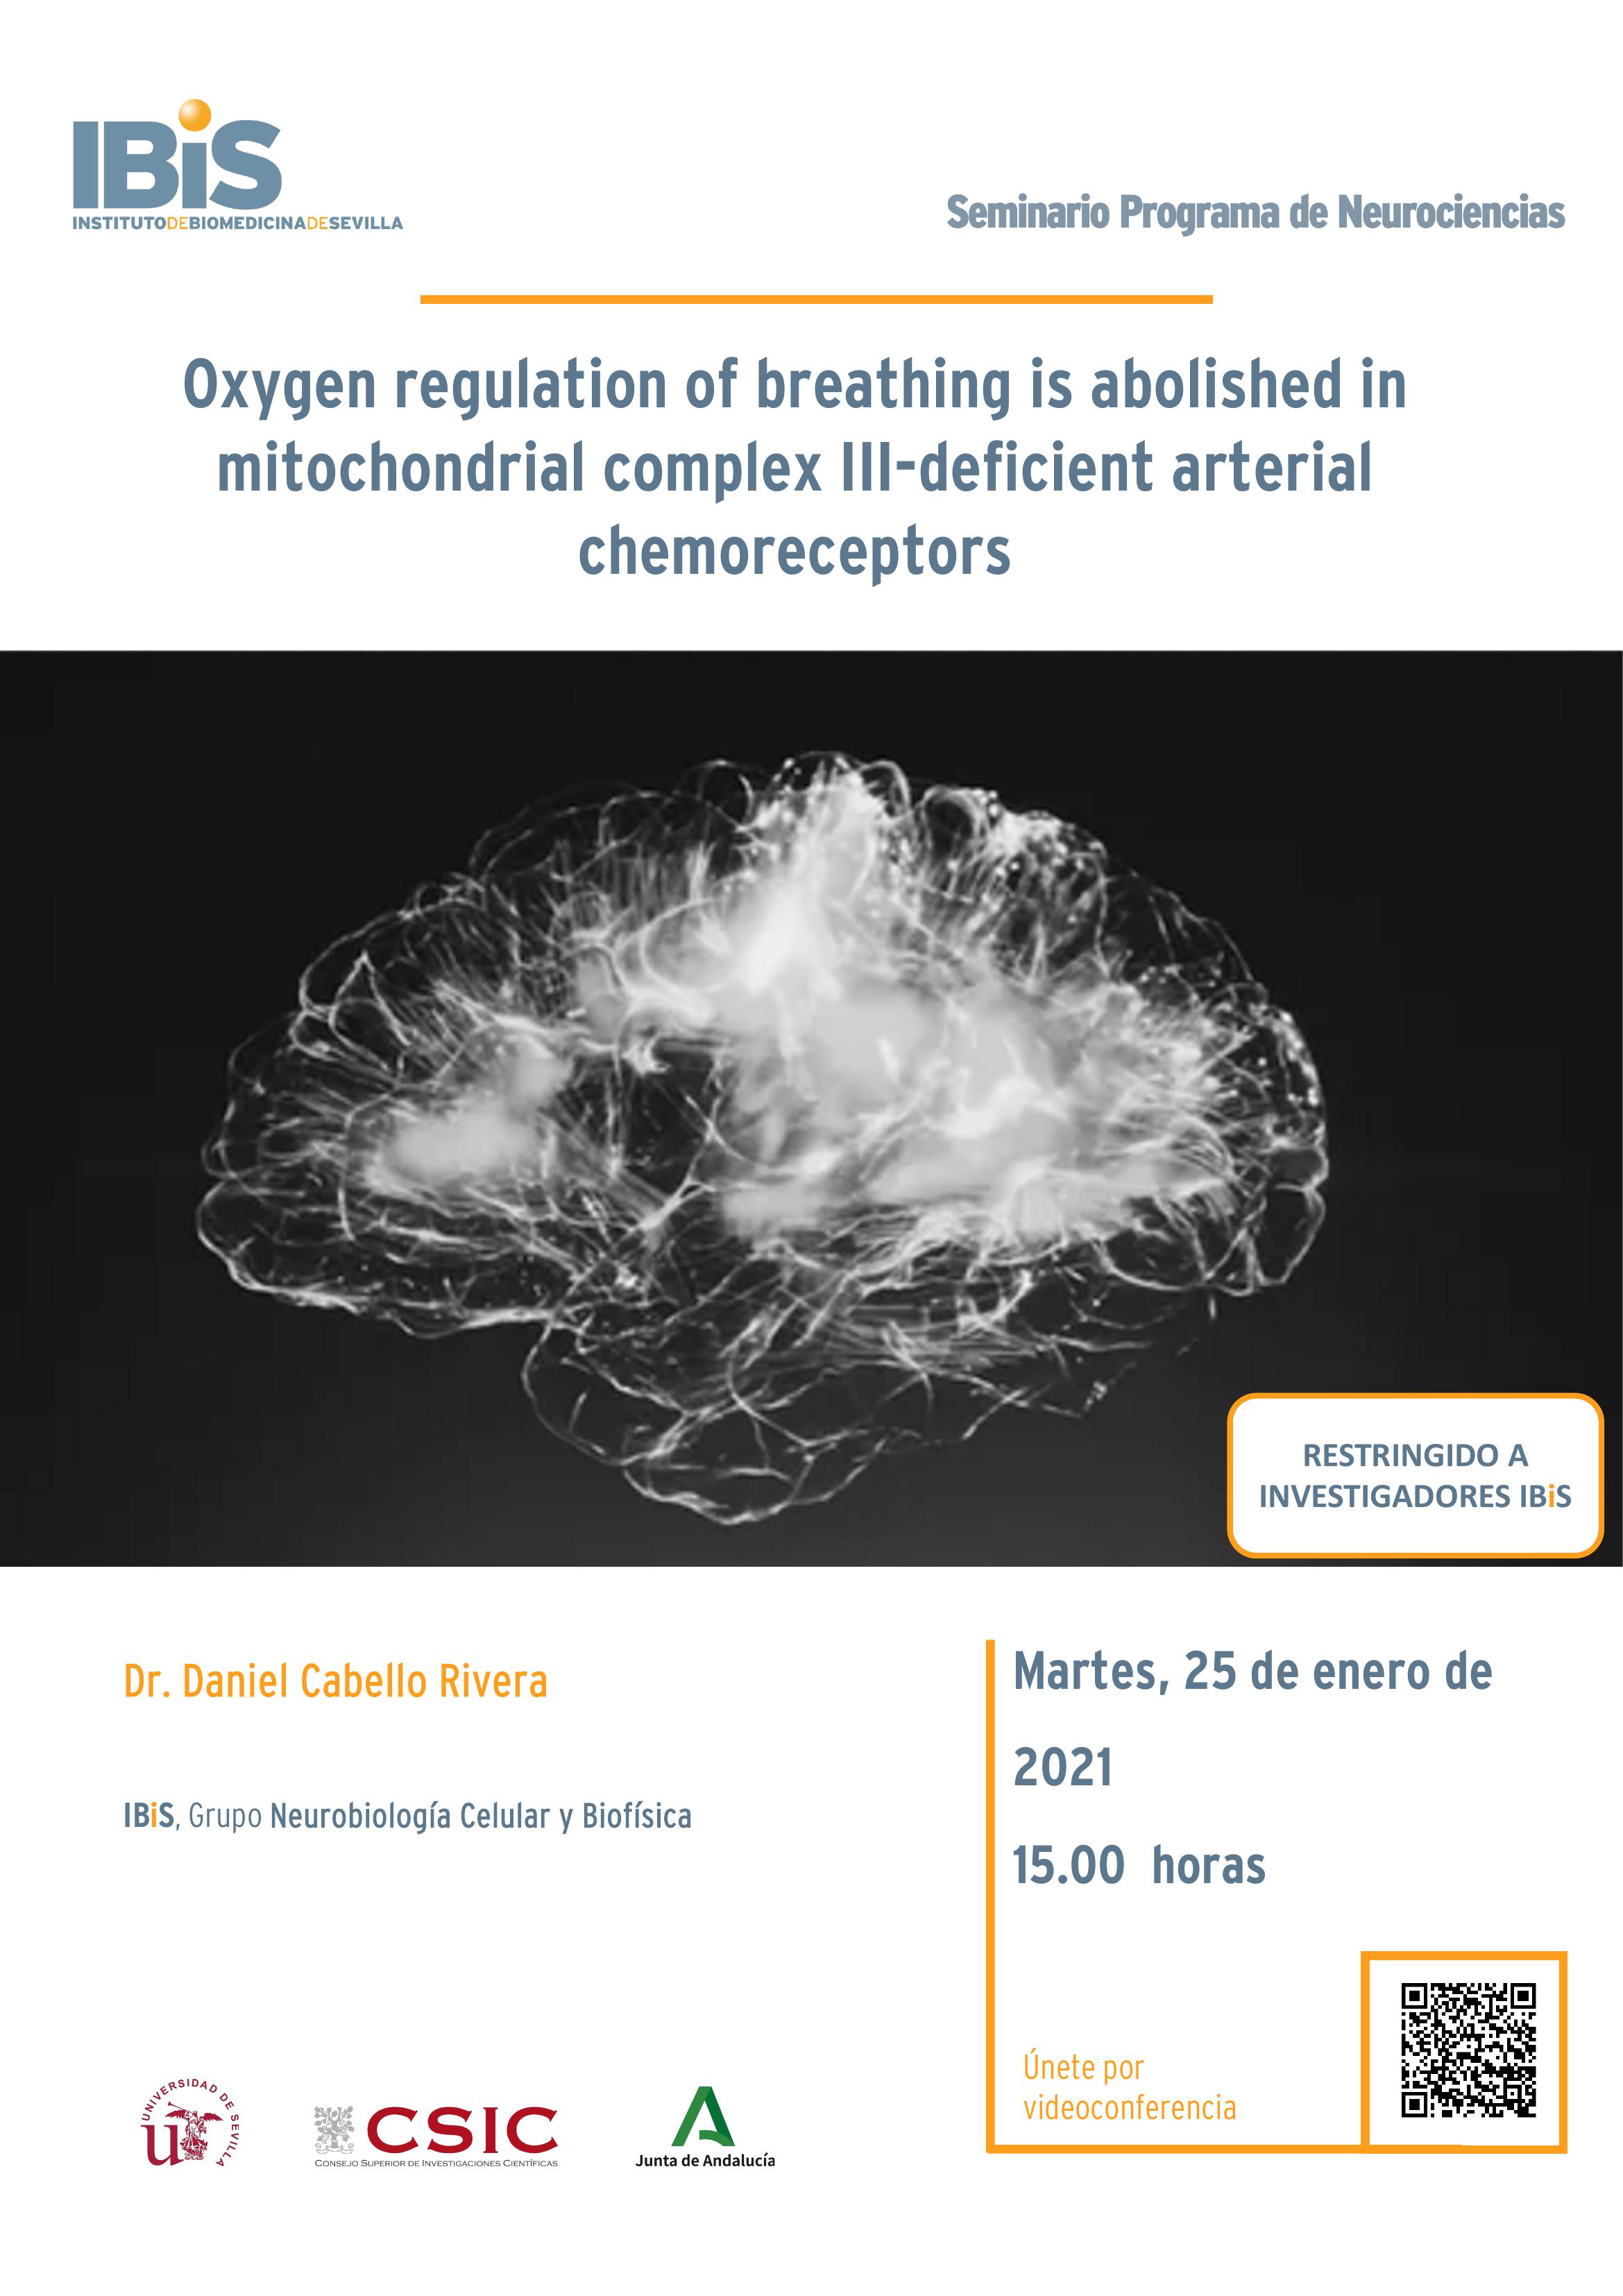 Poster: Oxygen regulation of breathing is abolished in mitochondrial complex III-deficient arterial chemoreceptors